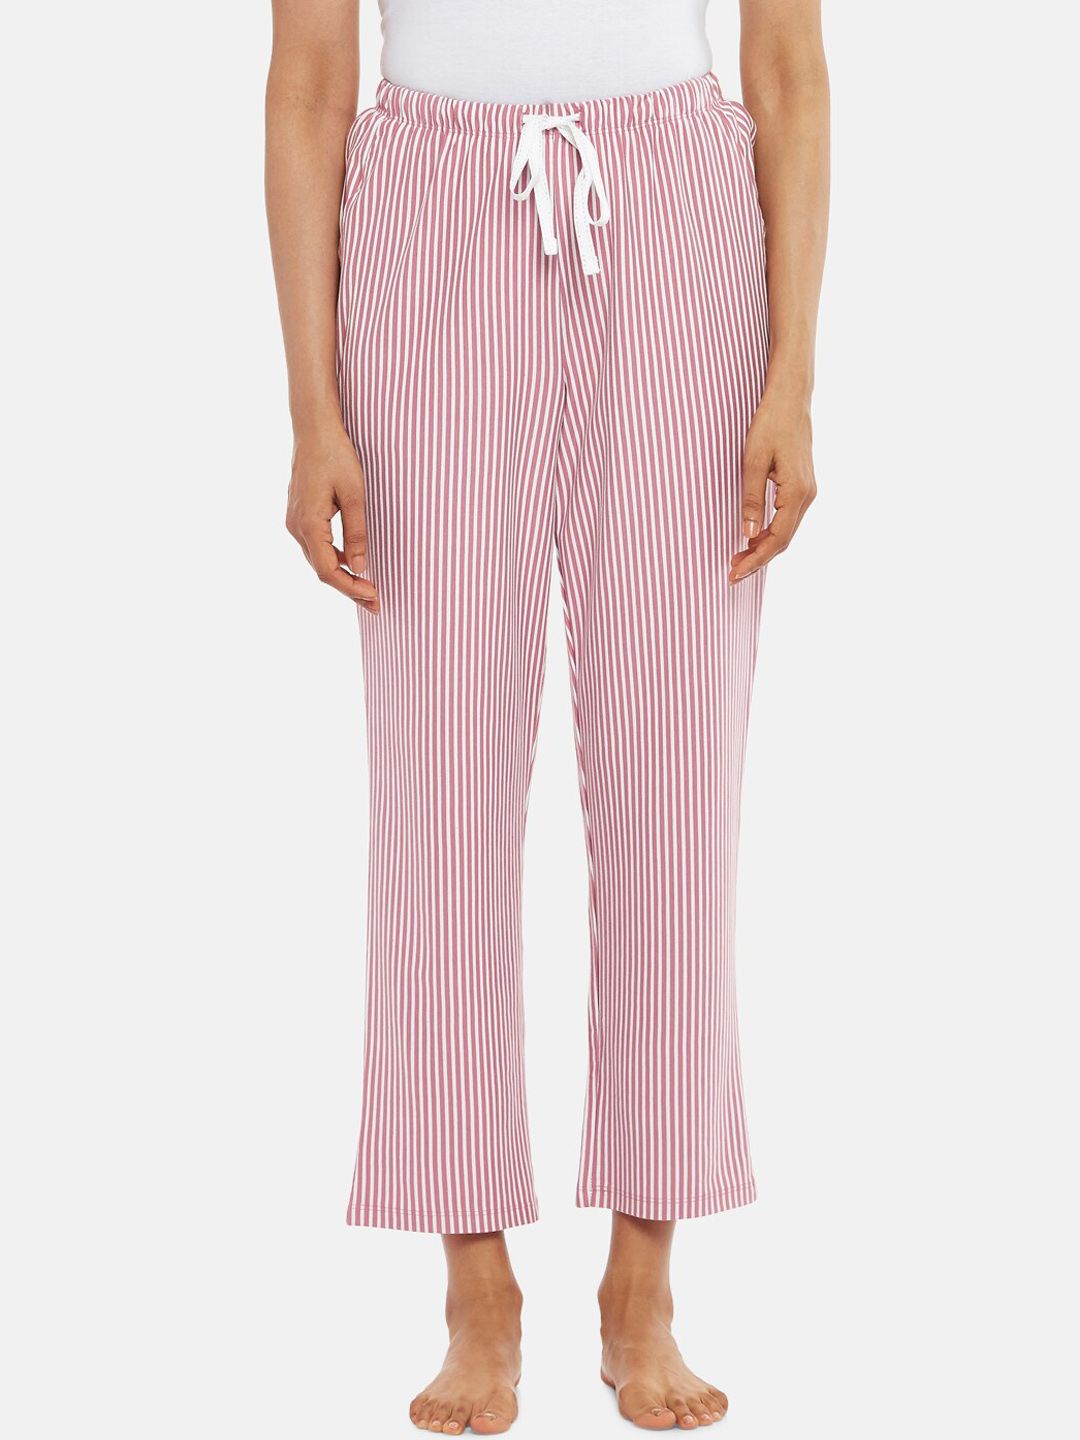 Dreamz by Pantaloons Women Pink And White Striped Lounge Pants Price in India